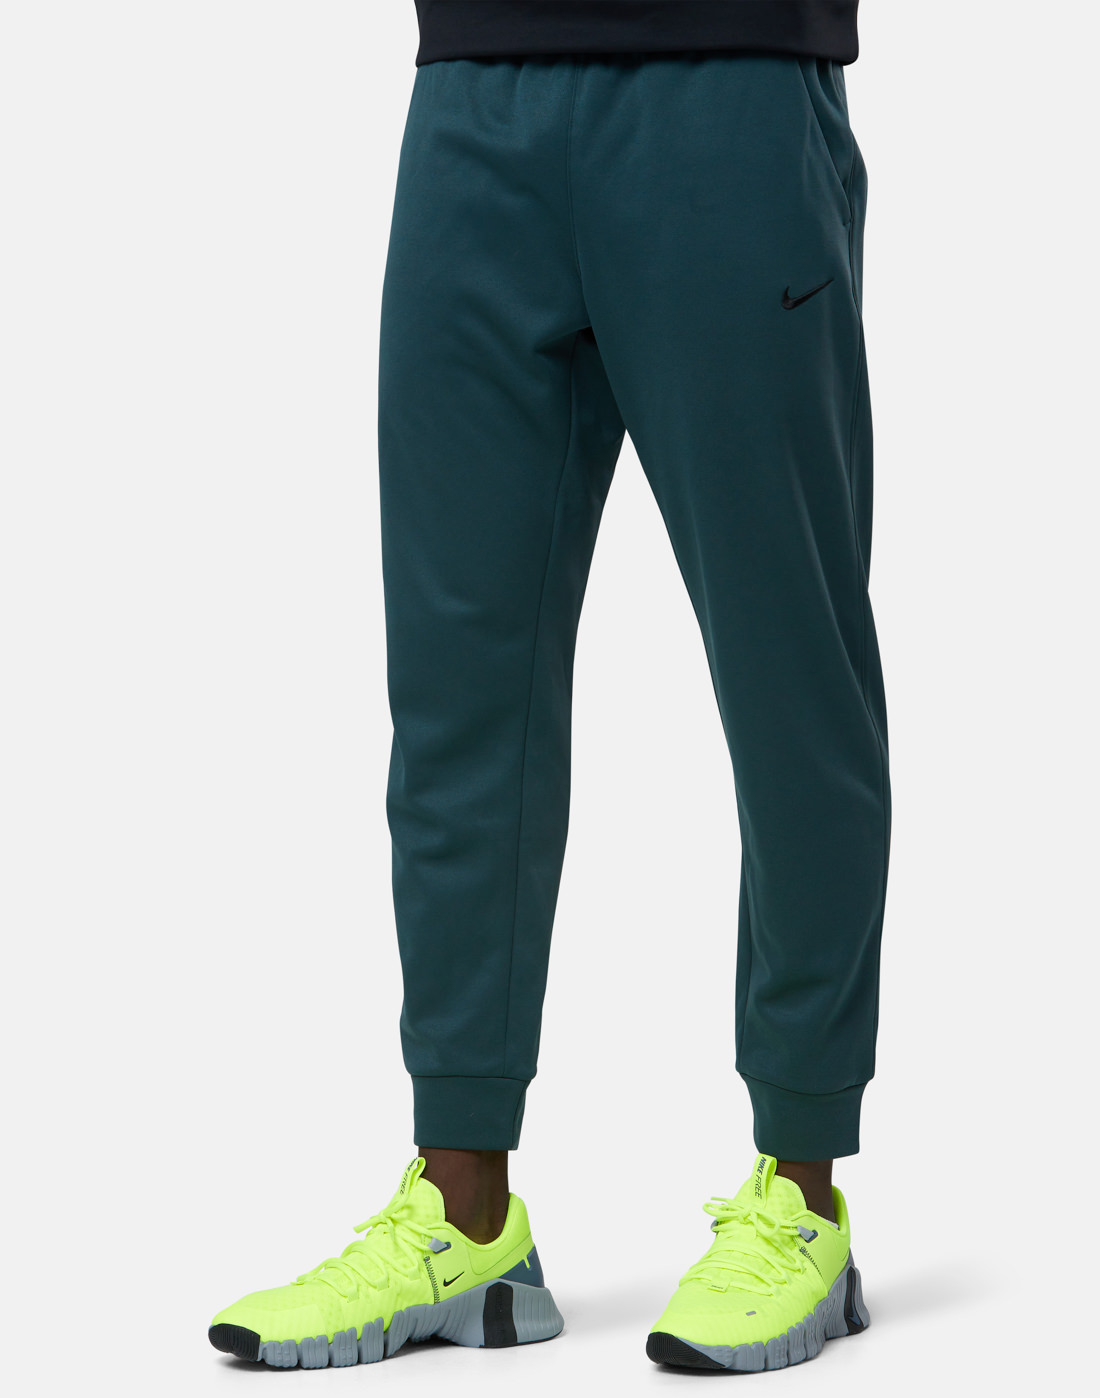 Nike Mens Therma Fleece Taper Pants - Green | Life Style Sports IE